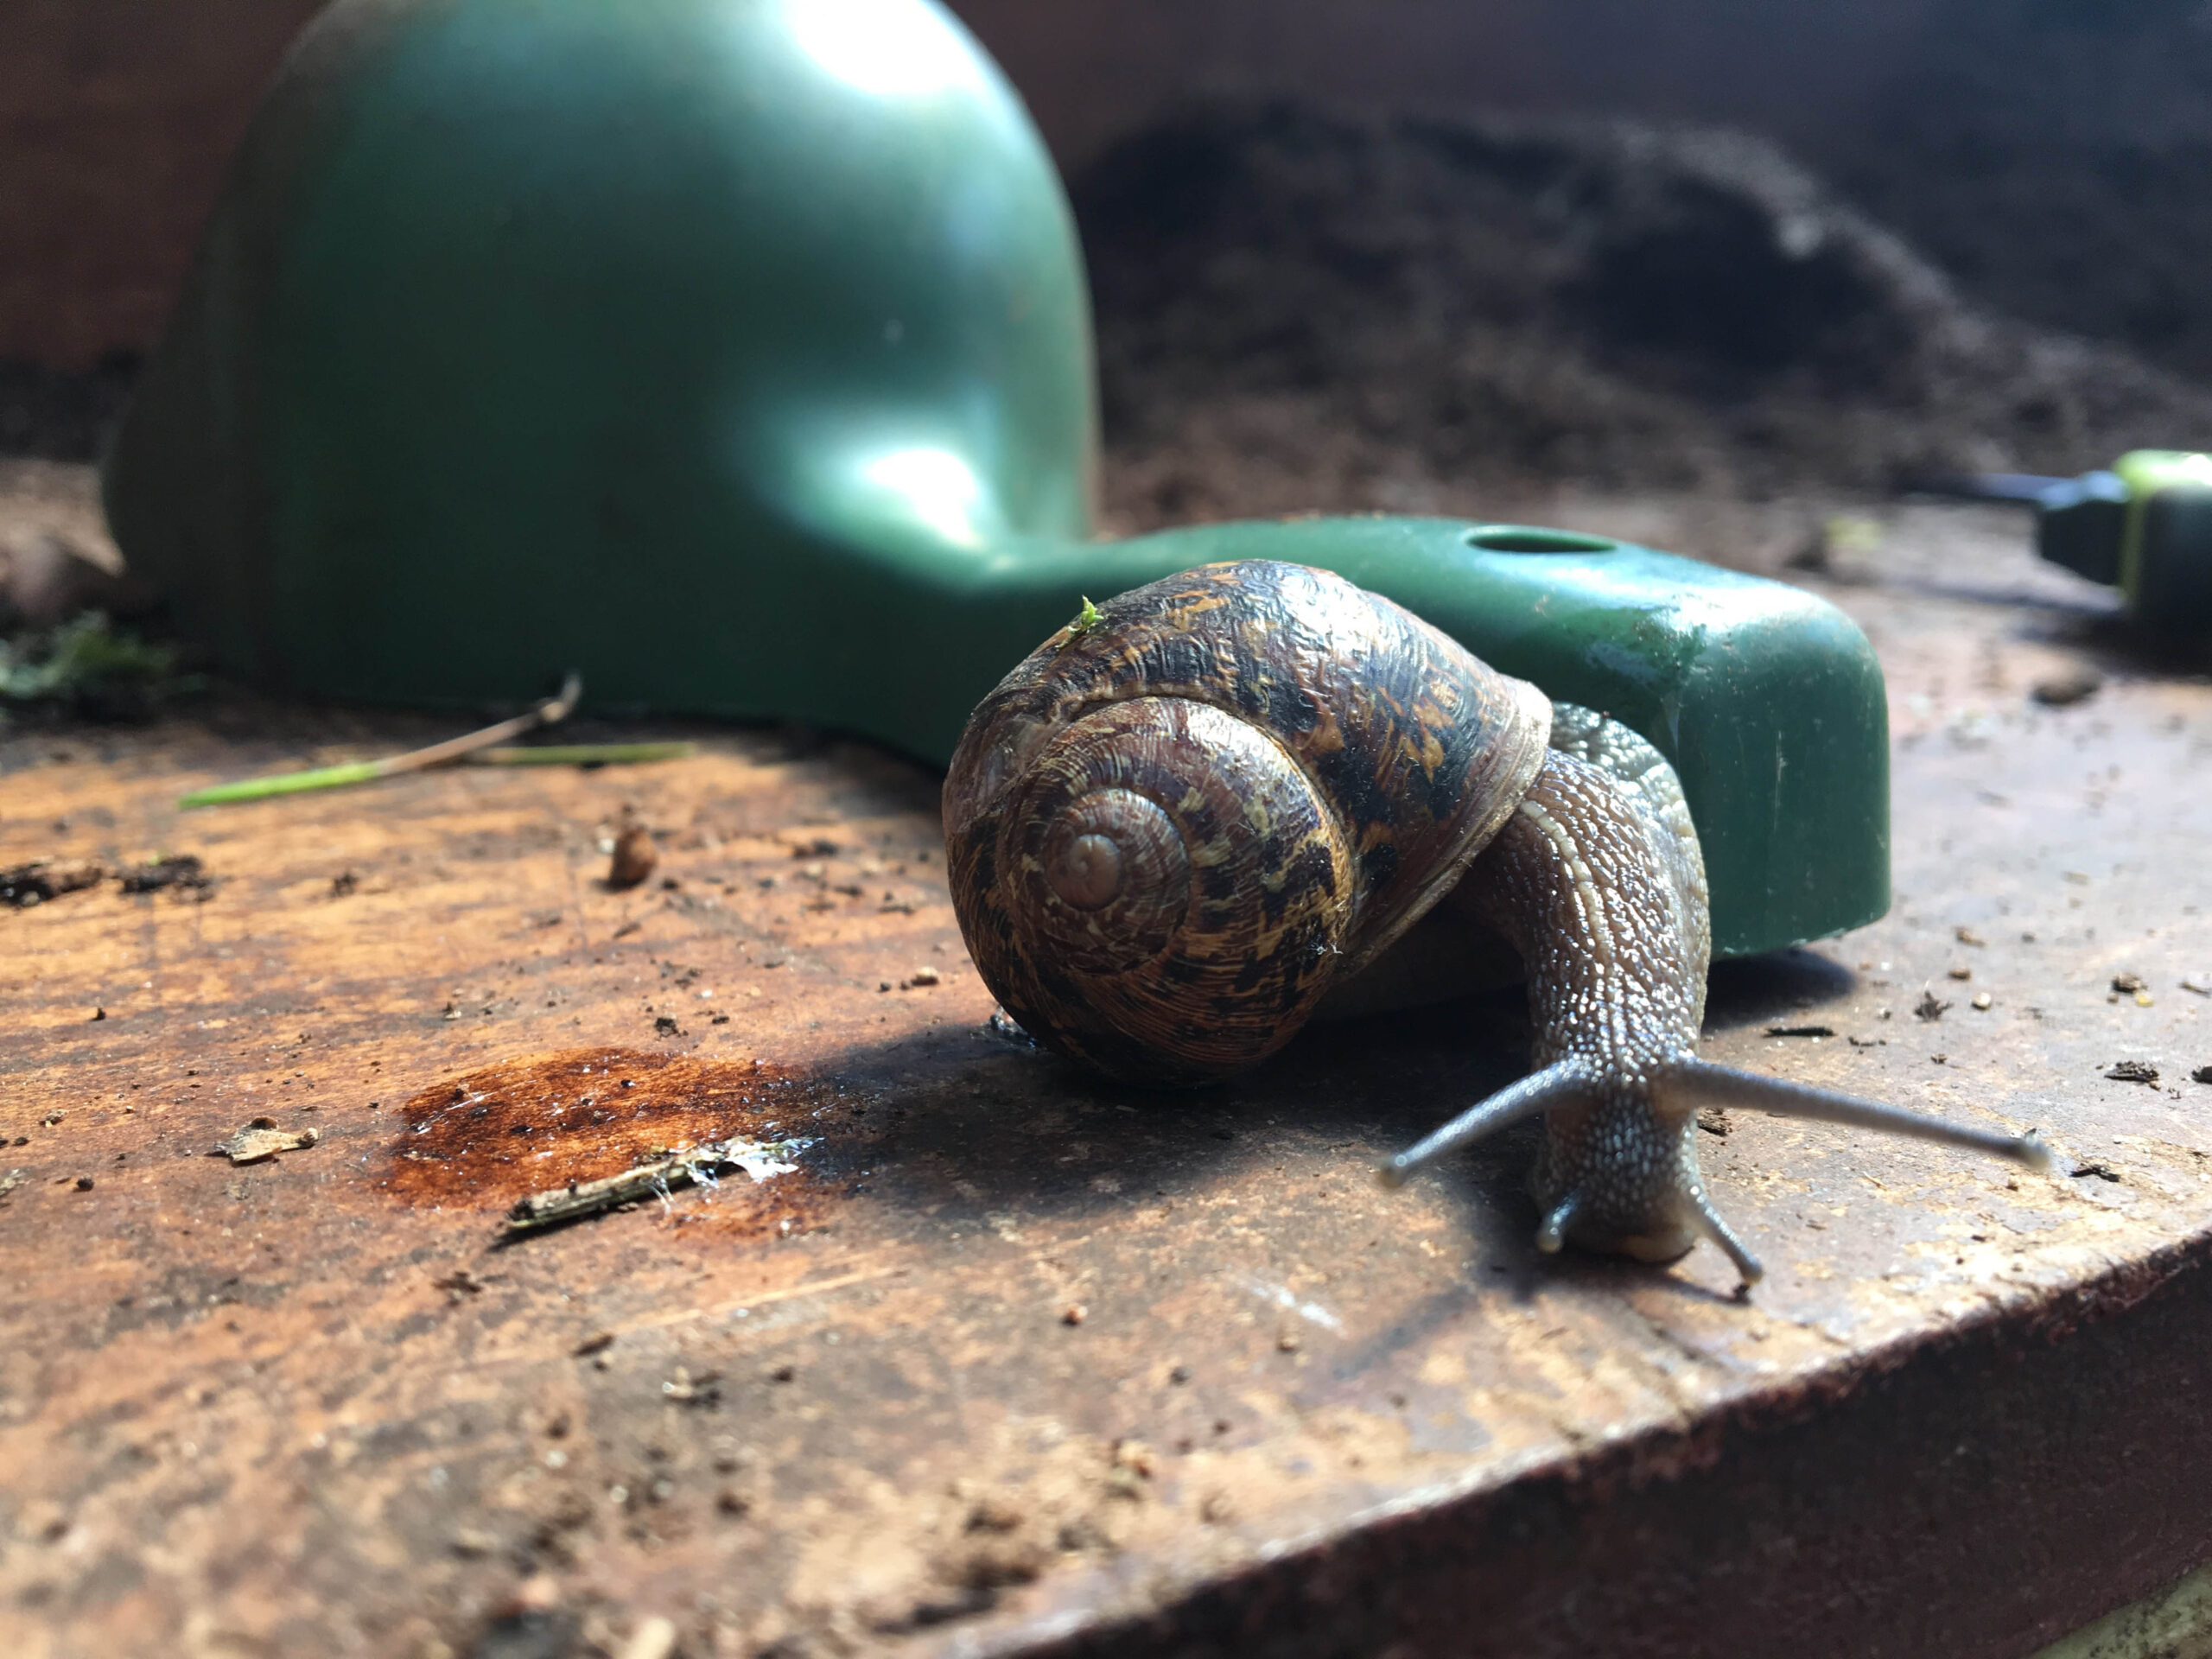 "They're a massive nuisance" - but here is why you need to make friends with slugs and snails anyway